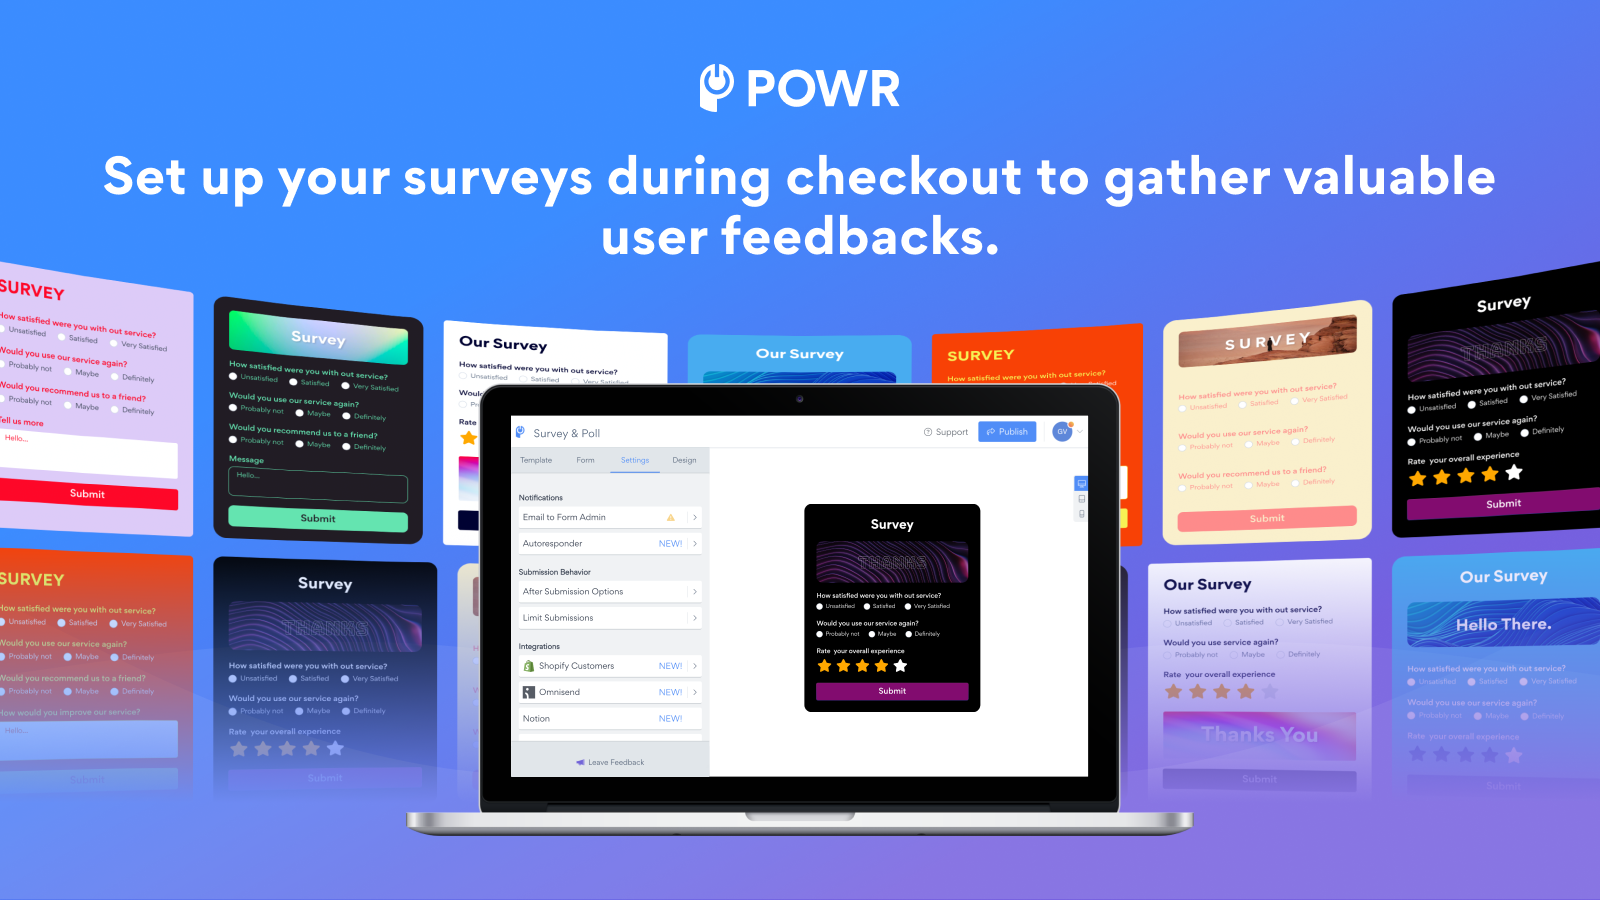 Collect valuable feedback - Set up surveys or polls at checkout.